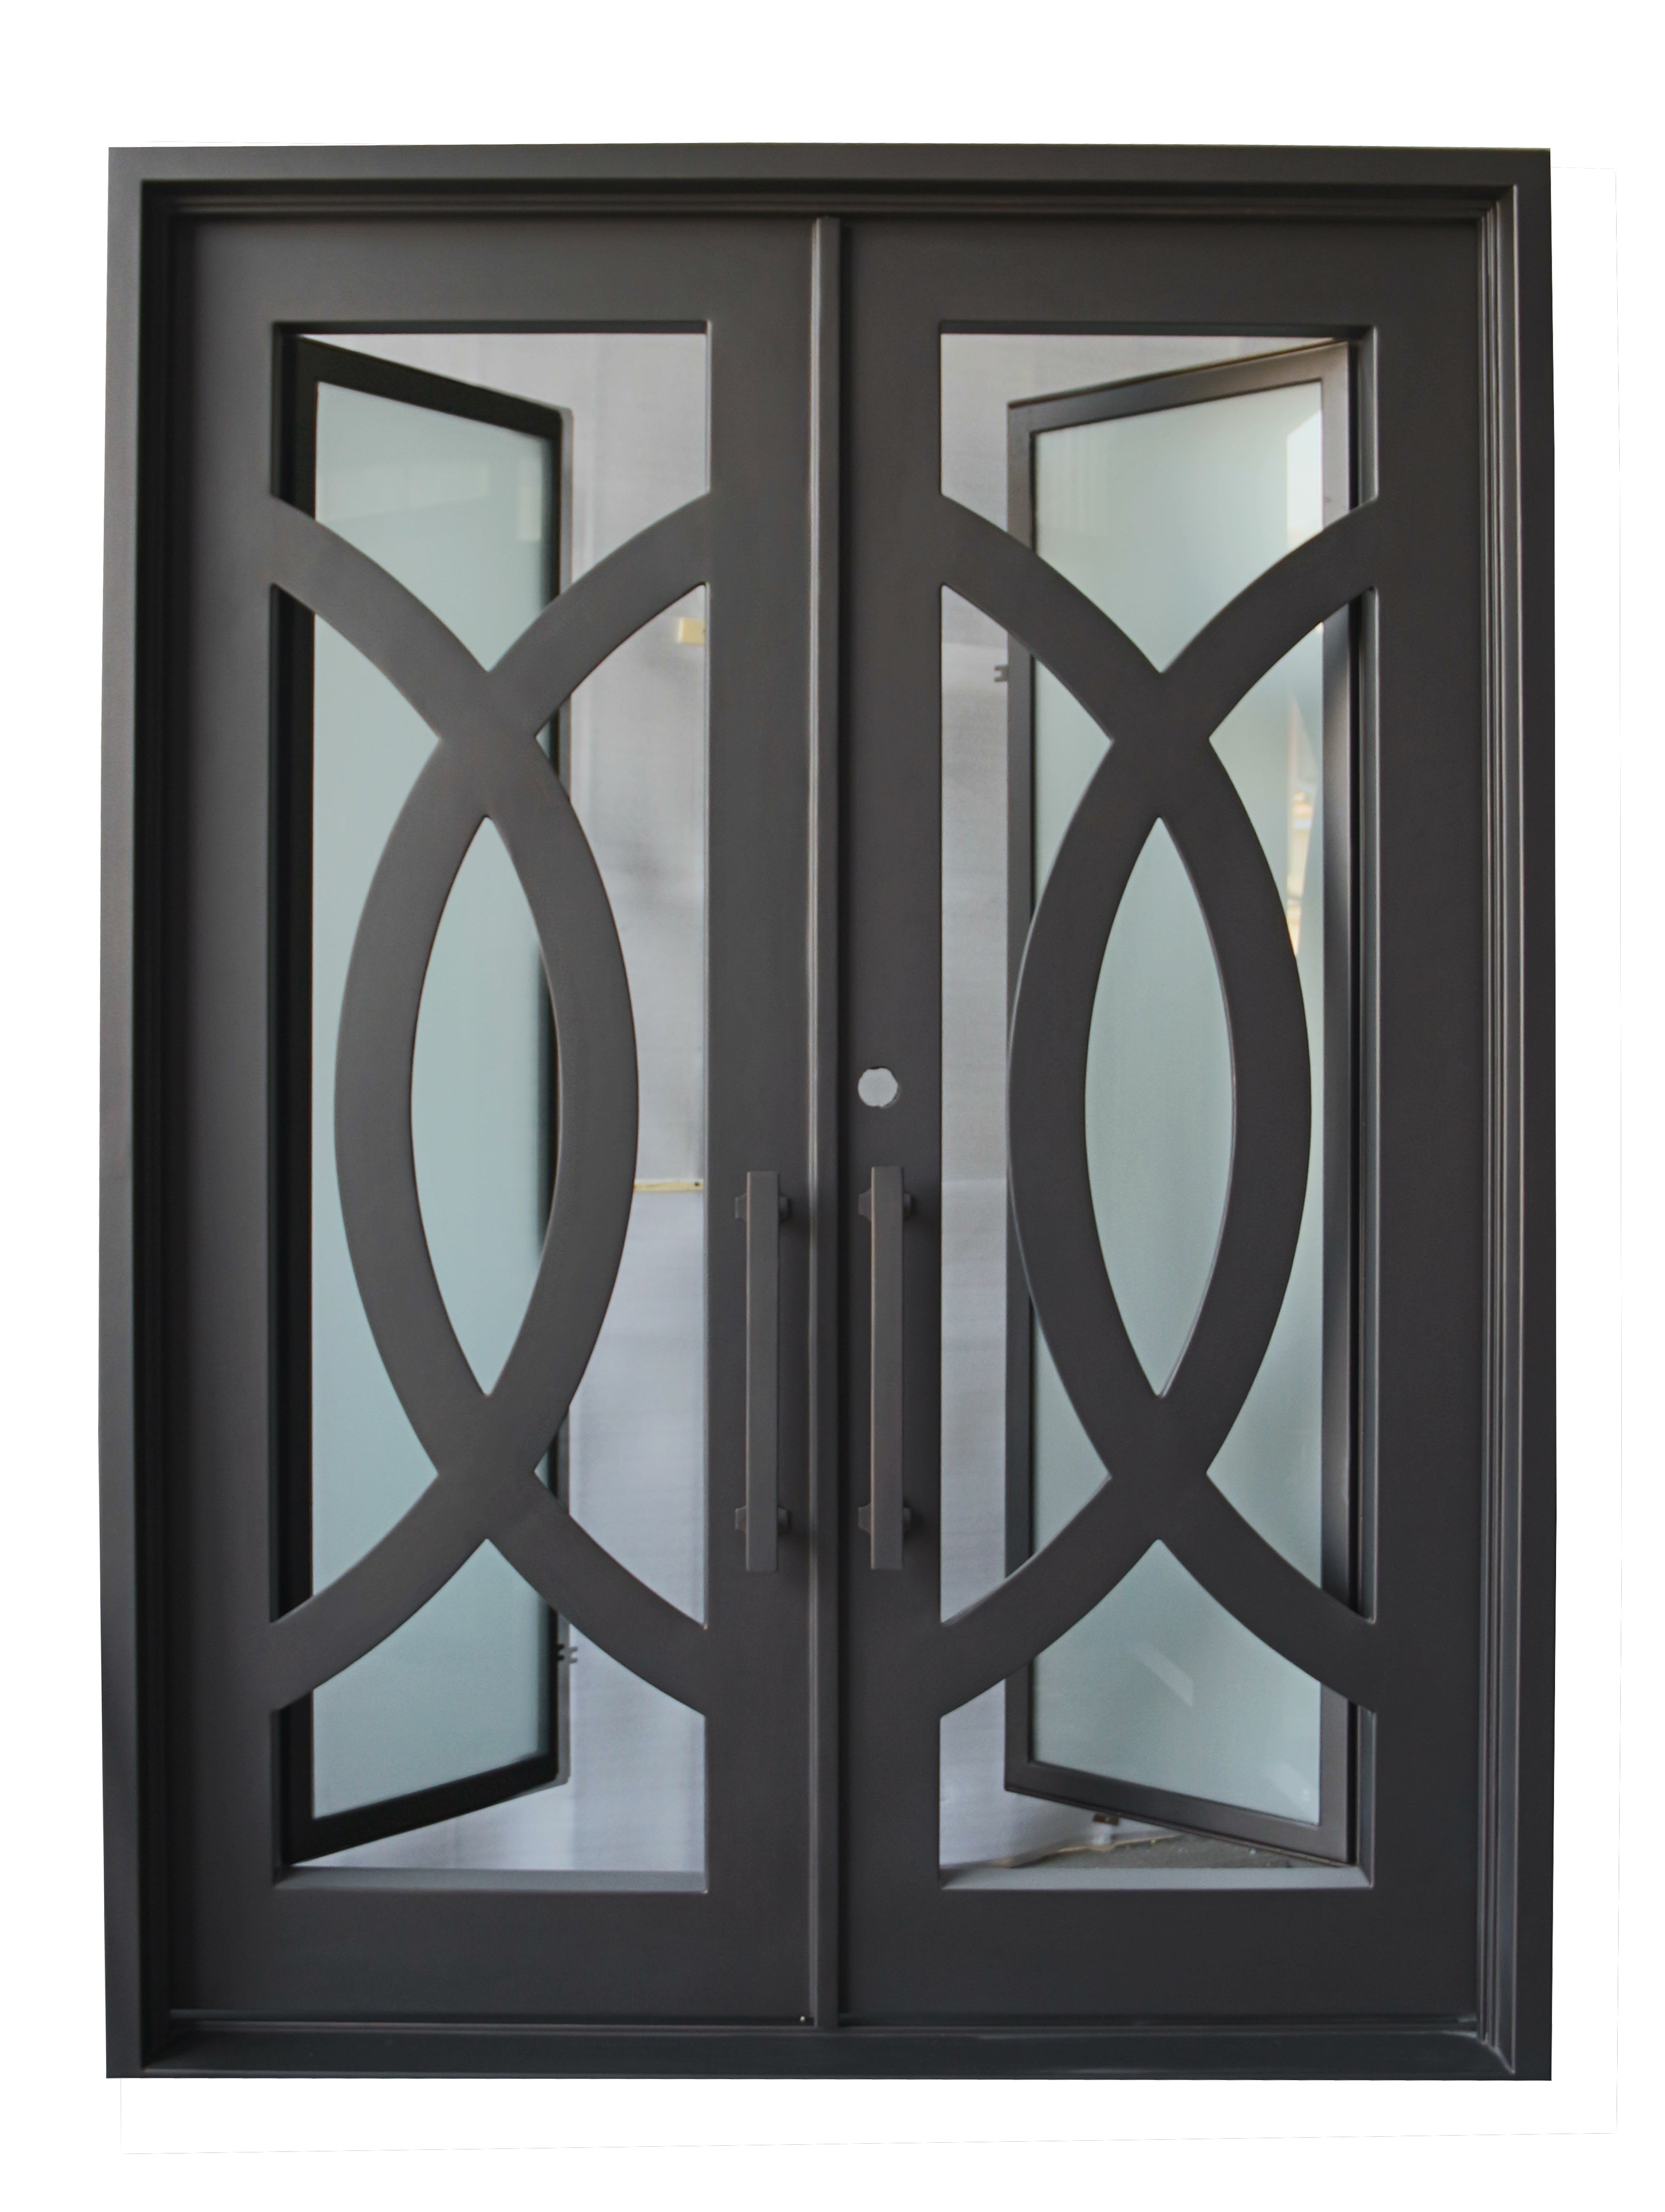 Bellevue Model Double Front Entry Iron Door With Tempered Frosted Glass Dark Bronze Finish - AAWAIZ IMPORTS